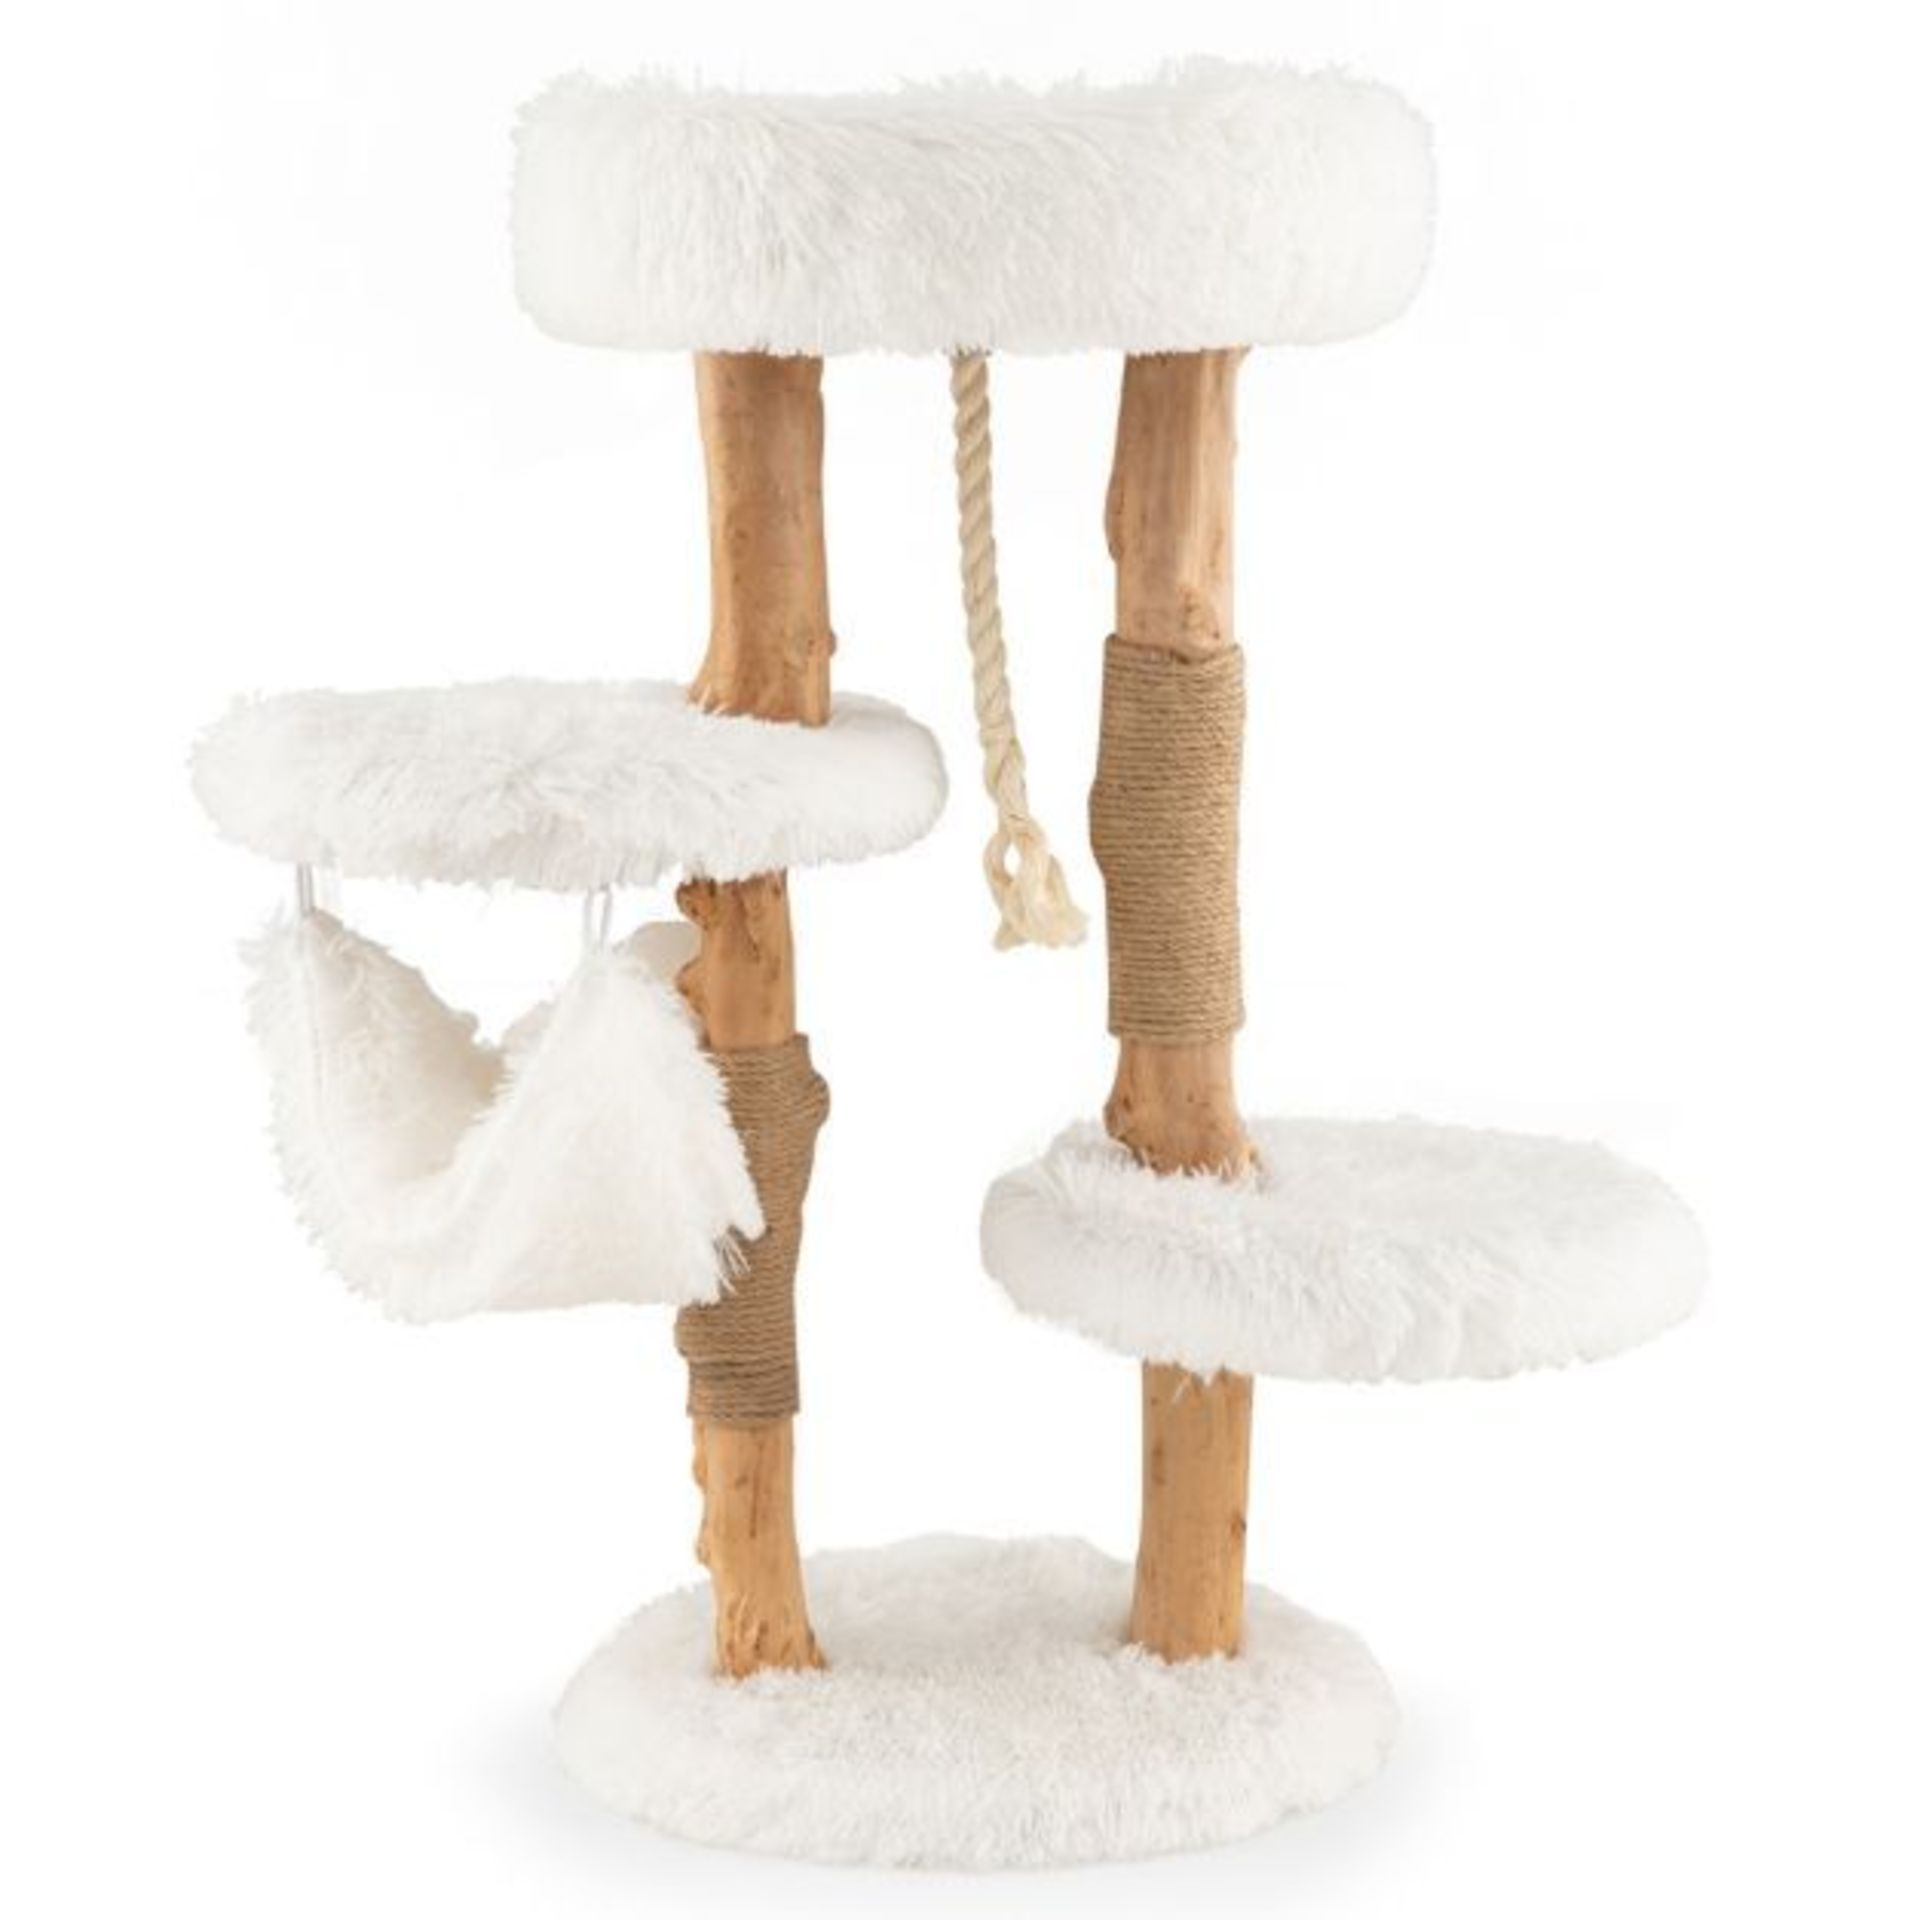 Solid Wood Cat Tower with Cozy Top Perch and 2 Platforms and 1 Hammock. - ER26. Made from natural